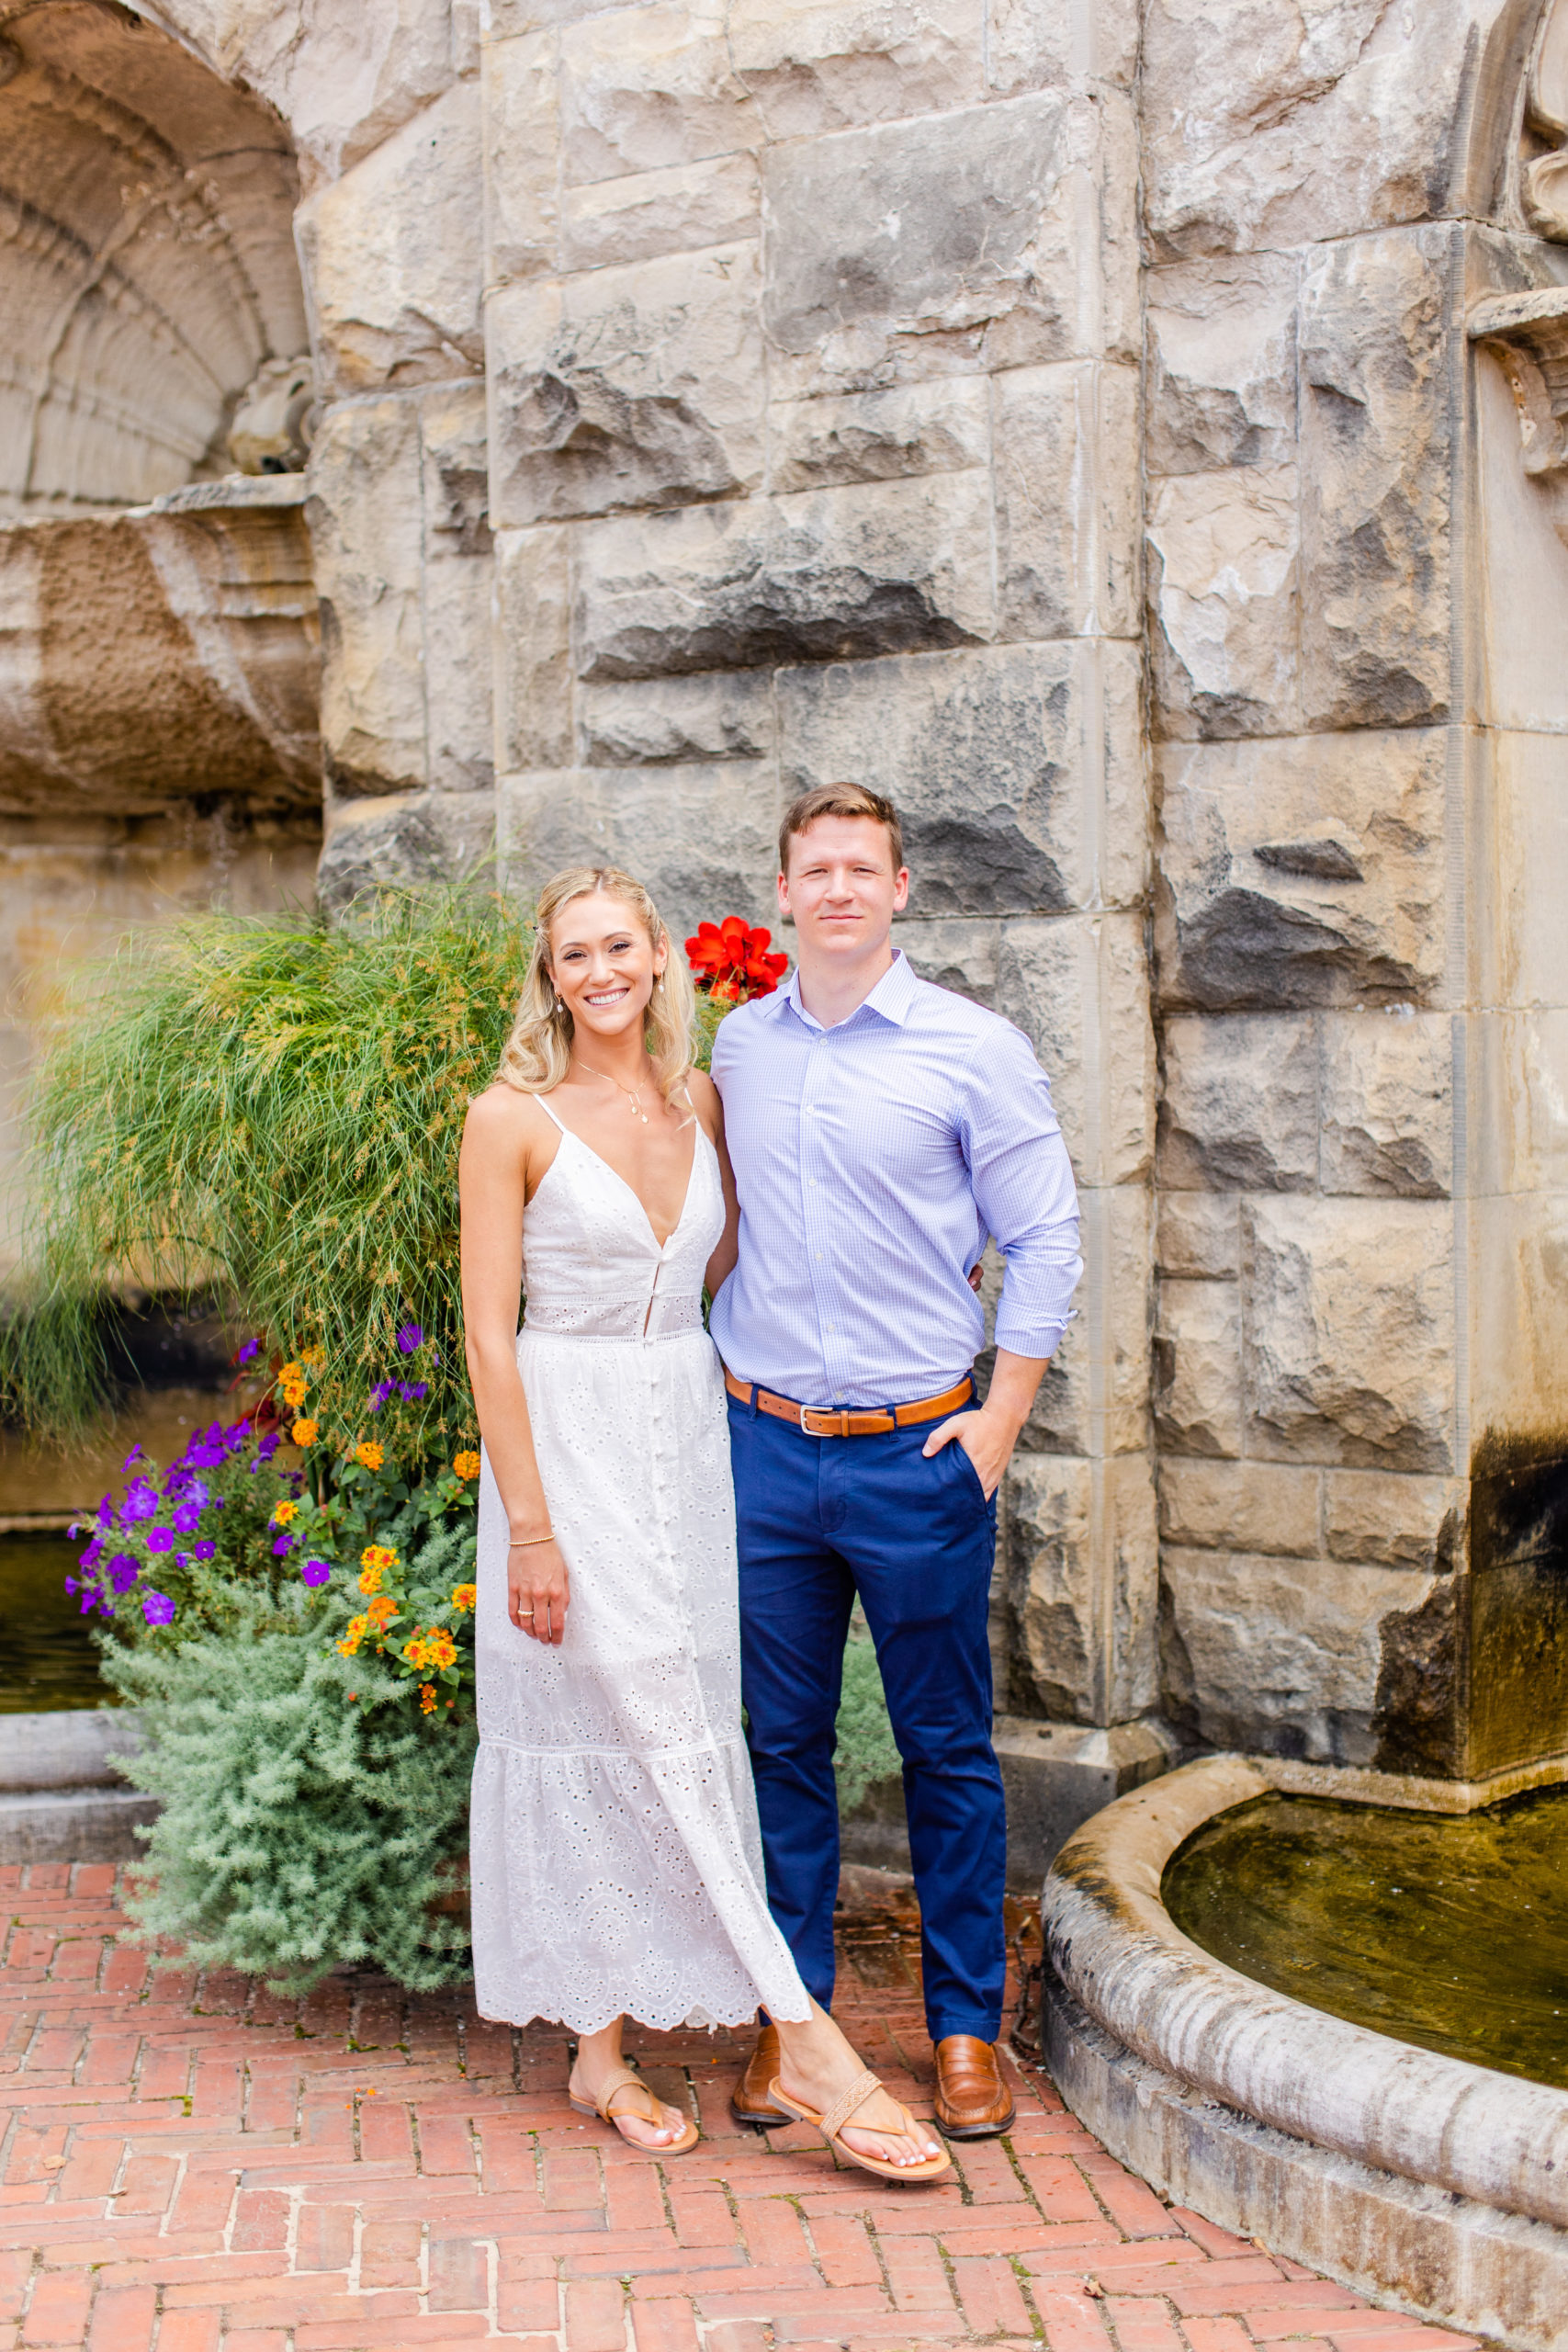 Newly engaged couple poses for photo outside of the Biltmore Estate